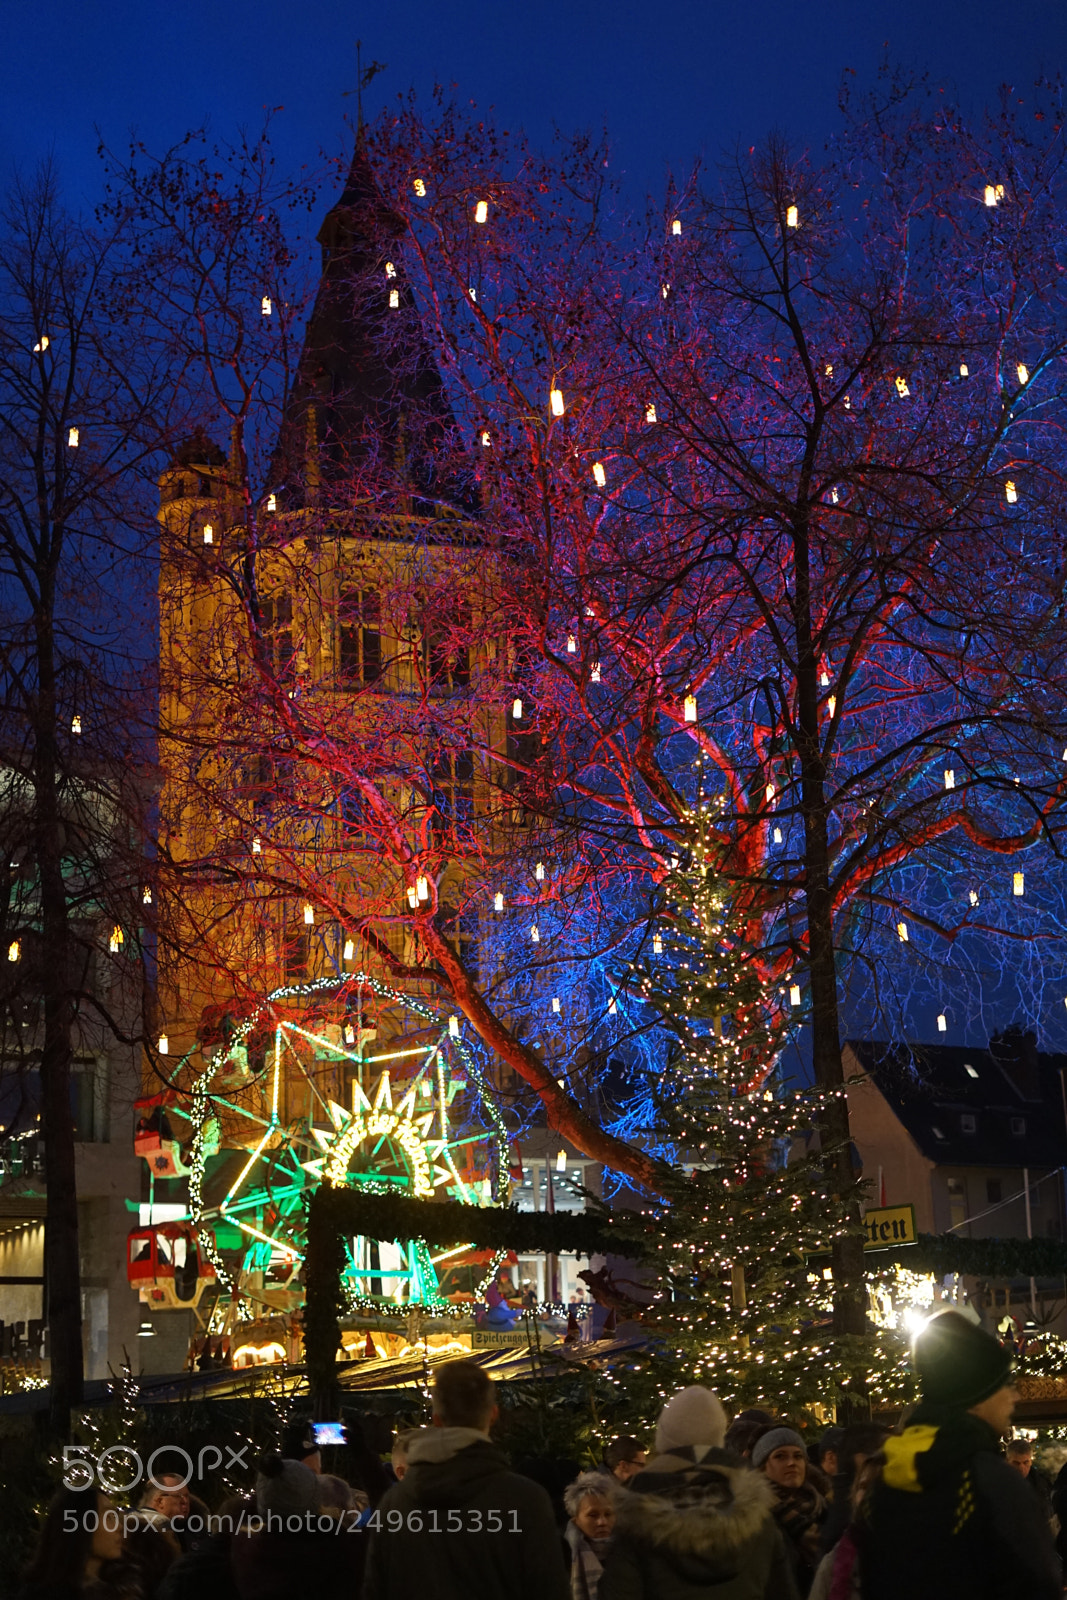 Sony a7 II sample photo. Christmas market in cologne photography